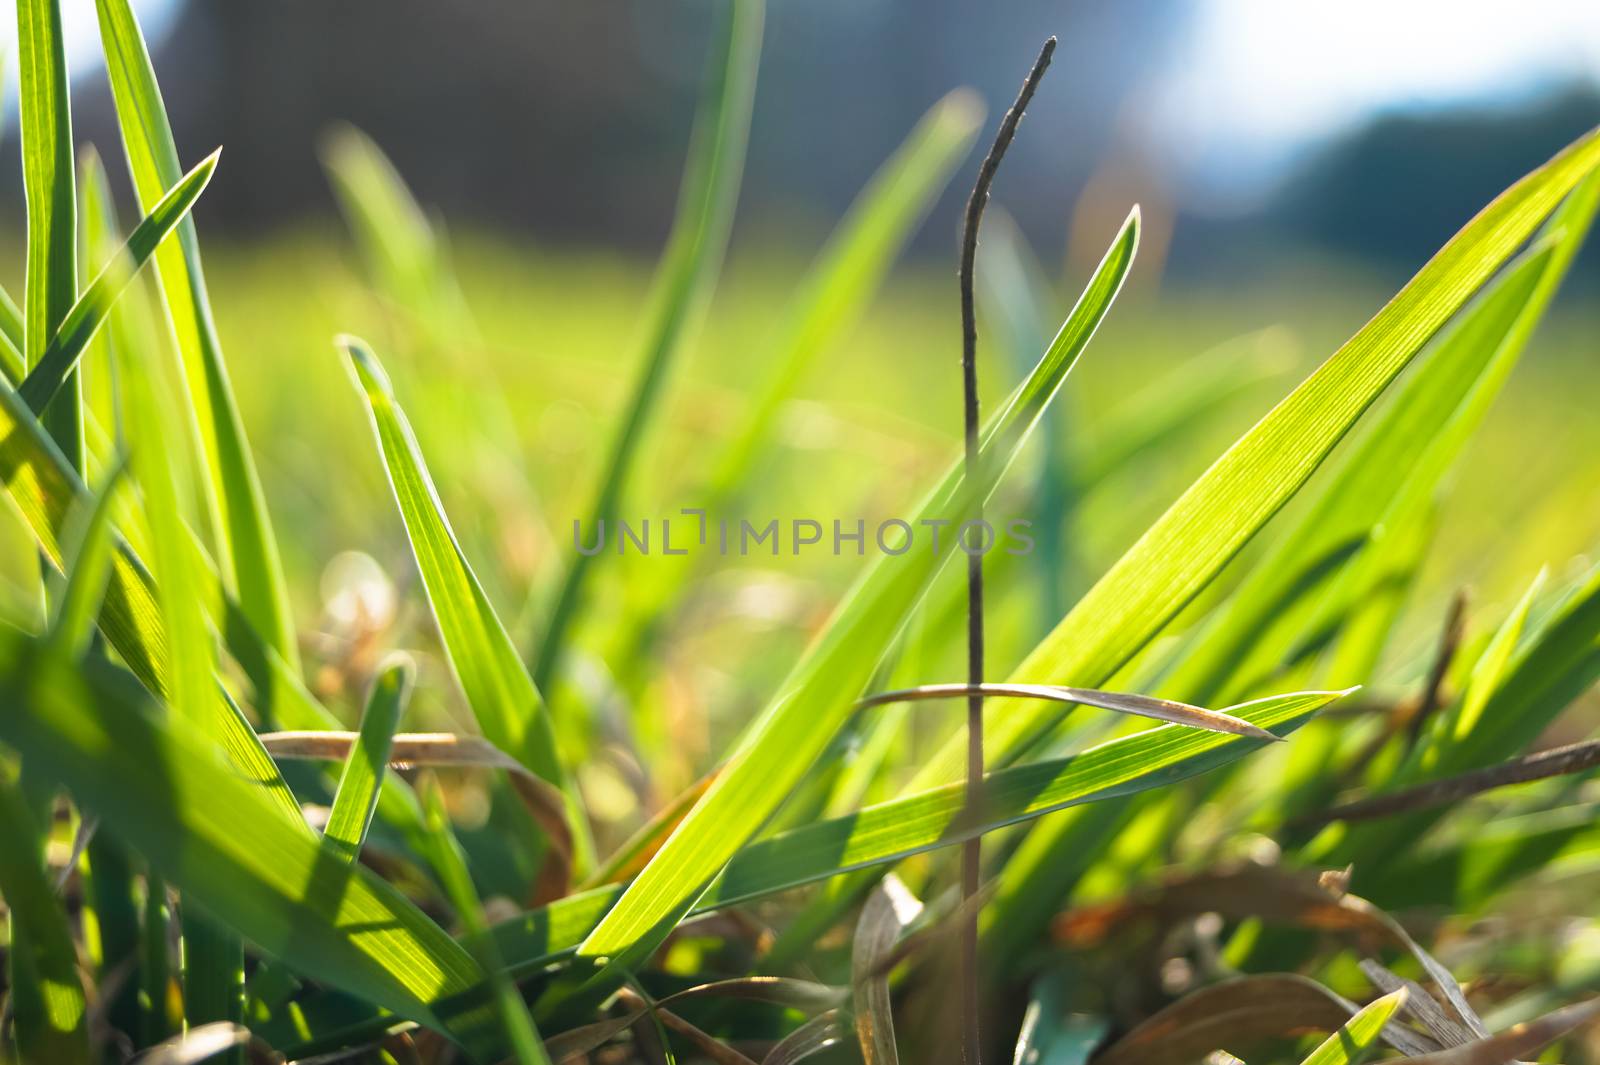 the young leaves of spring green grass by Oleczka11